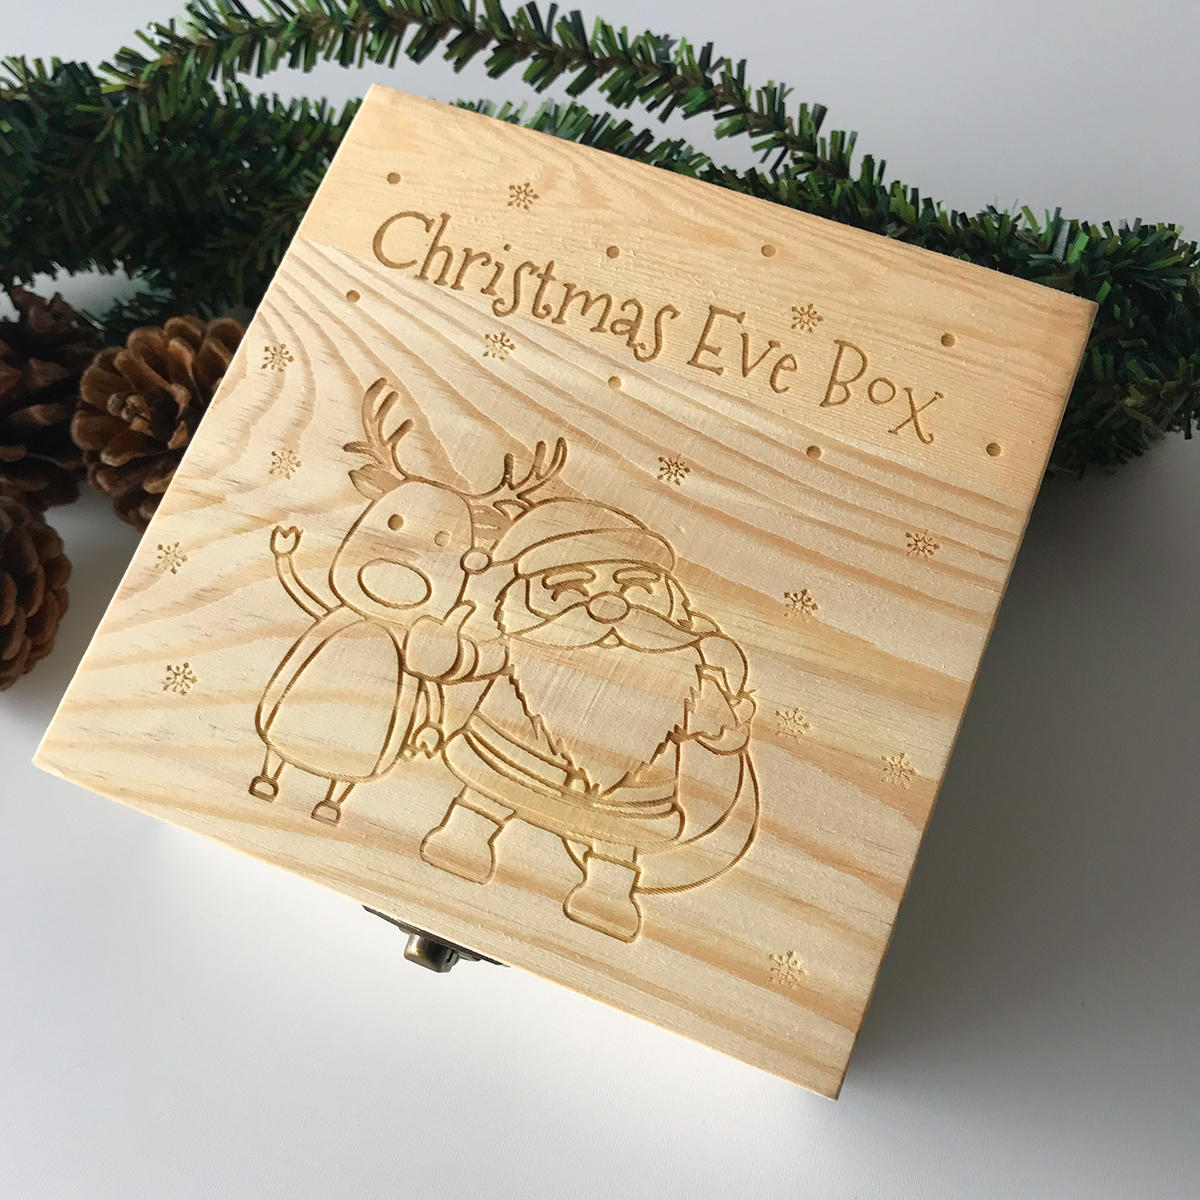 Wooden Christmas Eve Gift Box Engraved Wood Box Chocolate Packaging Party Home Decorations